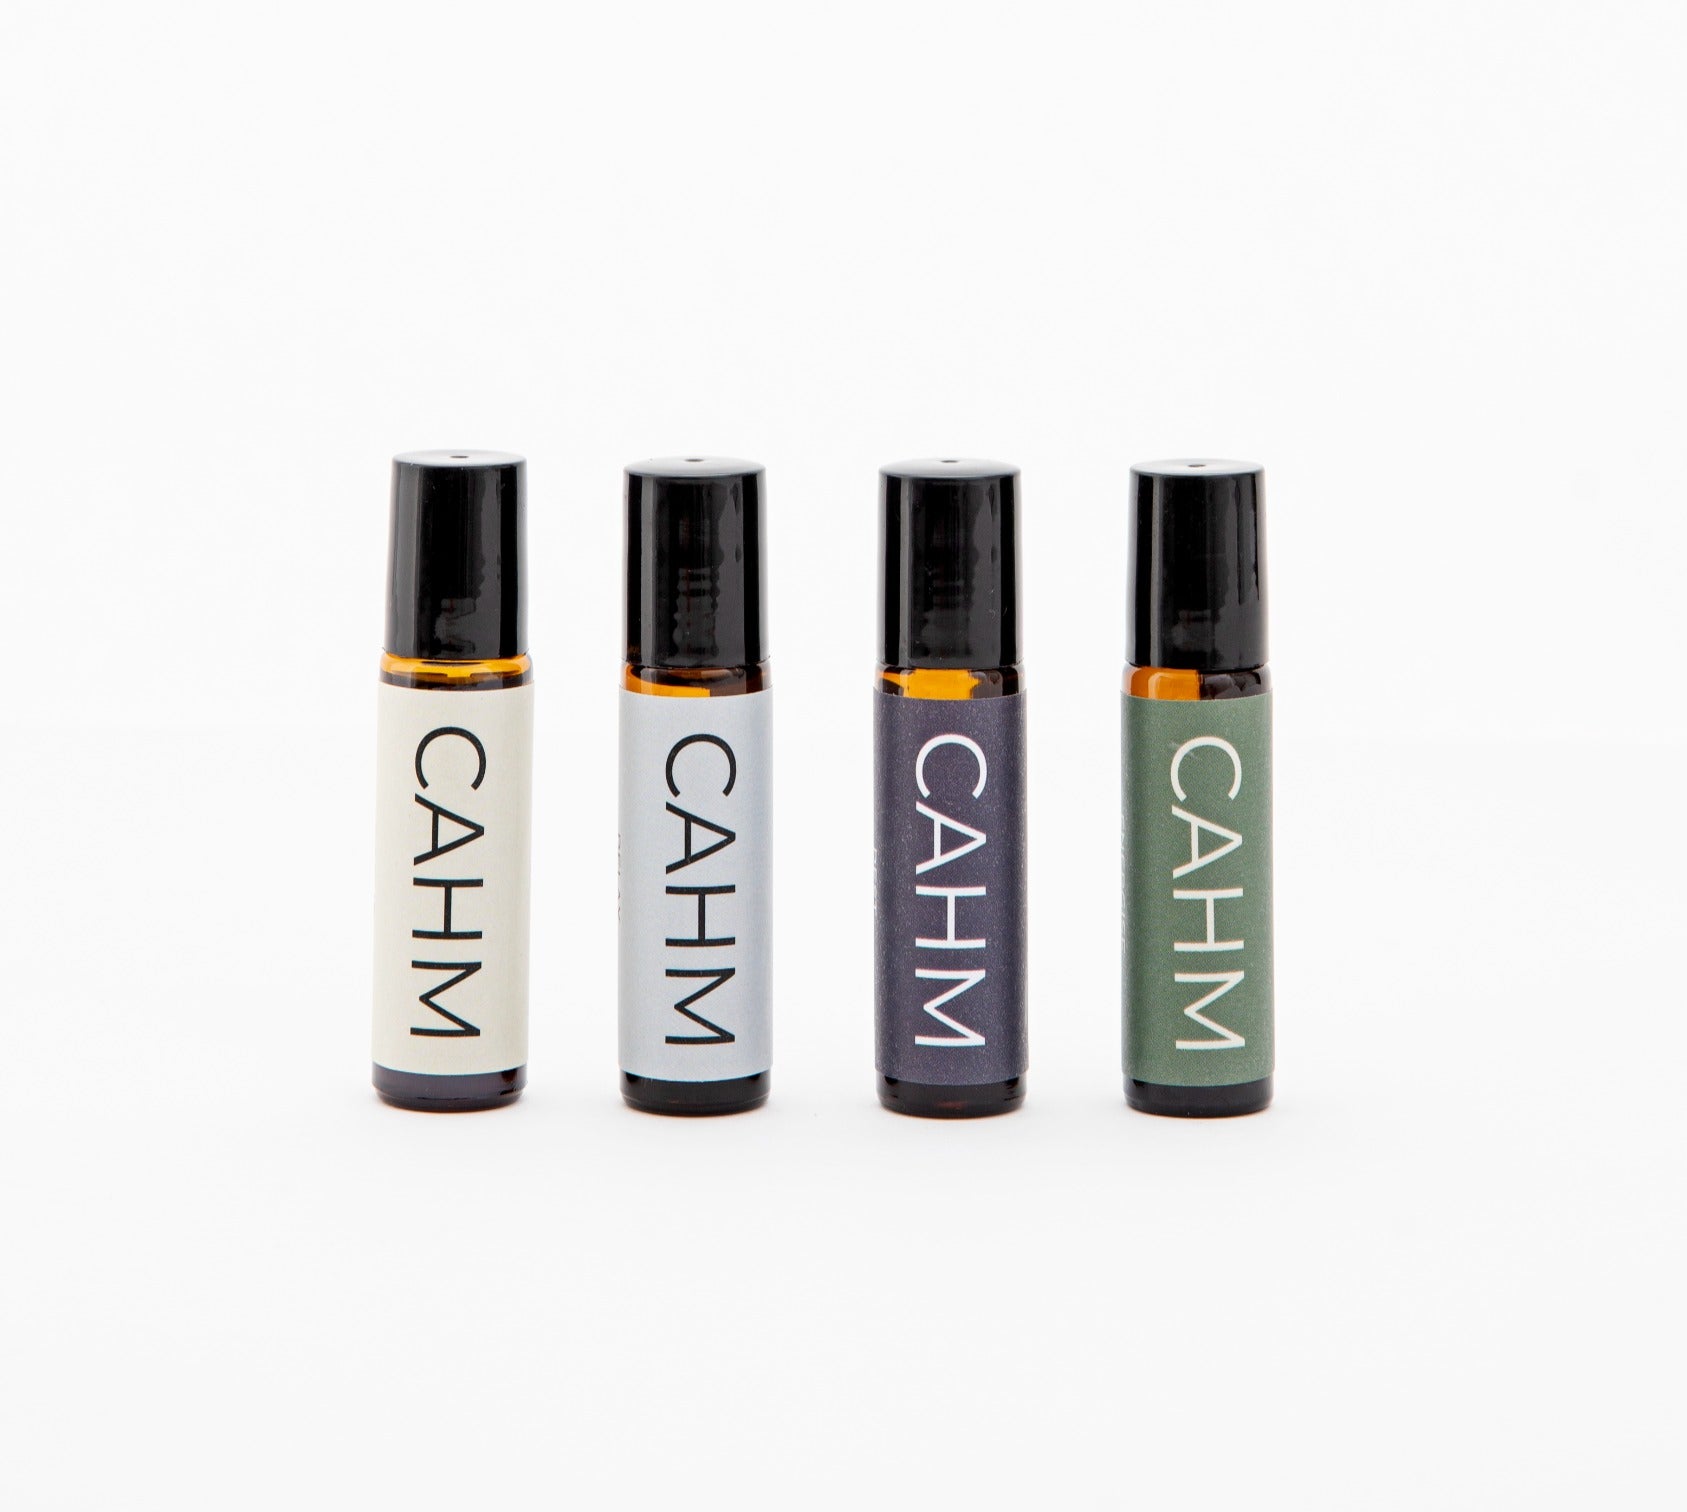 A Focus Aromatherapy Oil Roller from The CAHM Collective.